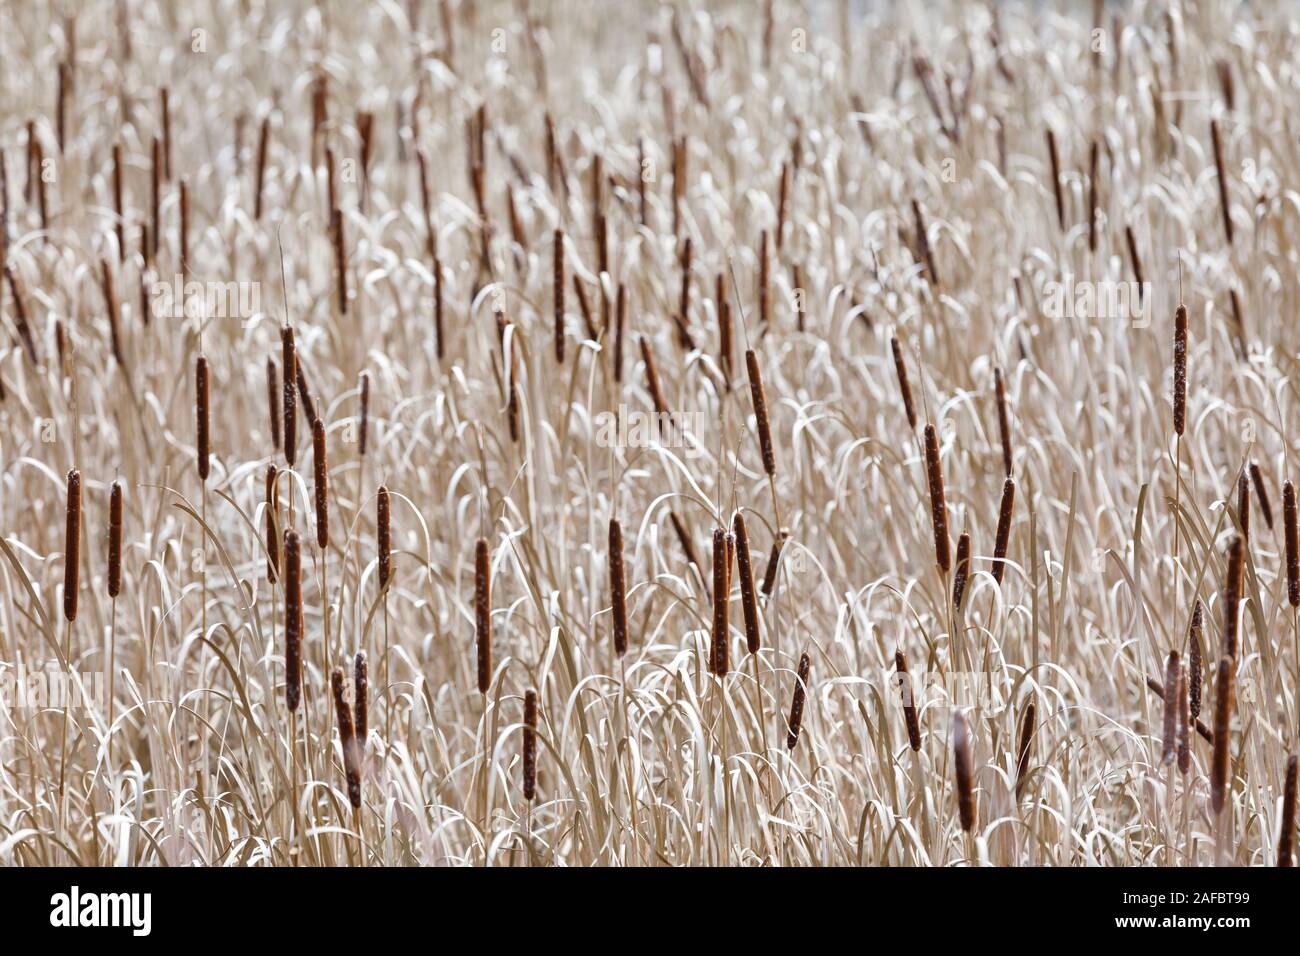 Sea of hundreds of reed-mace or cat-tails Stock Photo